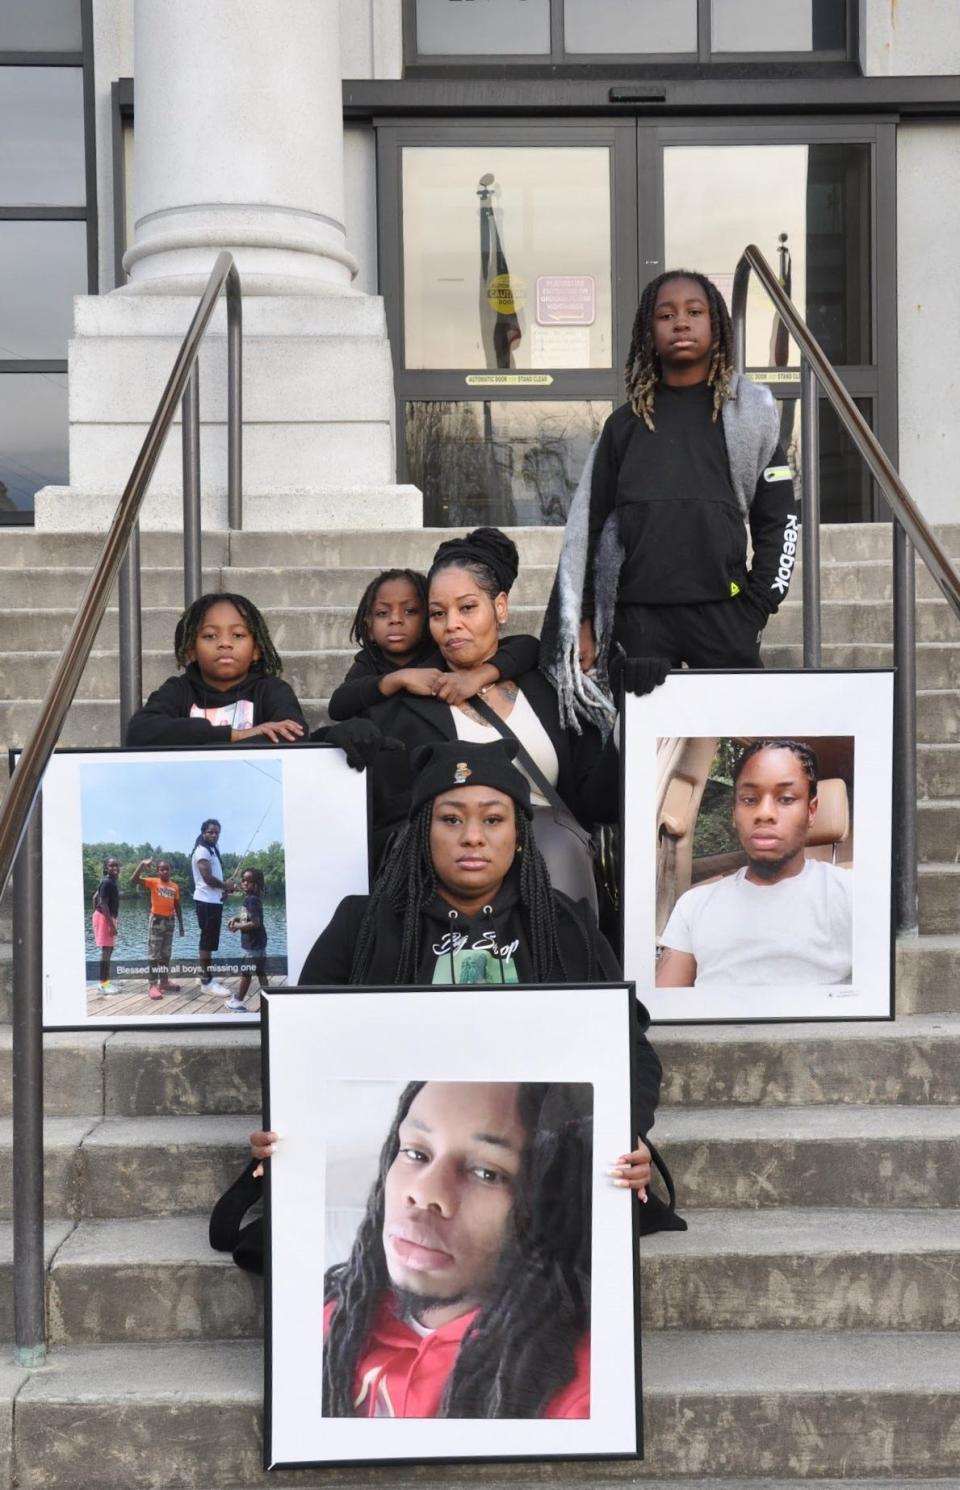 Patricia King and her family holding photos of Elijah Timmons III. Seen in the photo are three of Timmons' four sons: 12-year-old Siir'ziion (far right), 6-year-old Kii'zerriion (middle), and 10-year-old E'miilliion (far left).